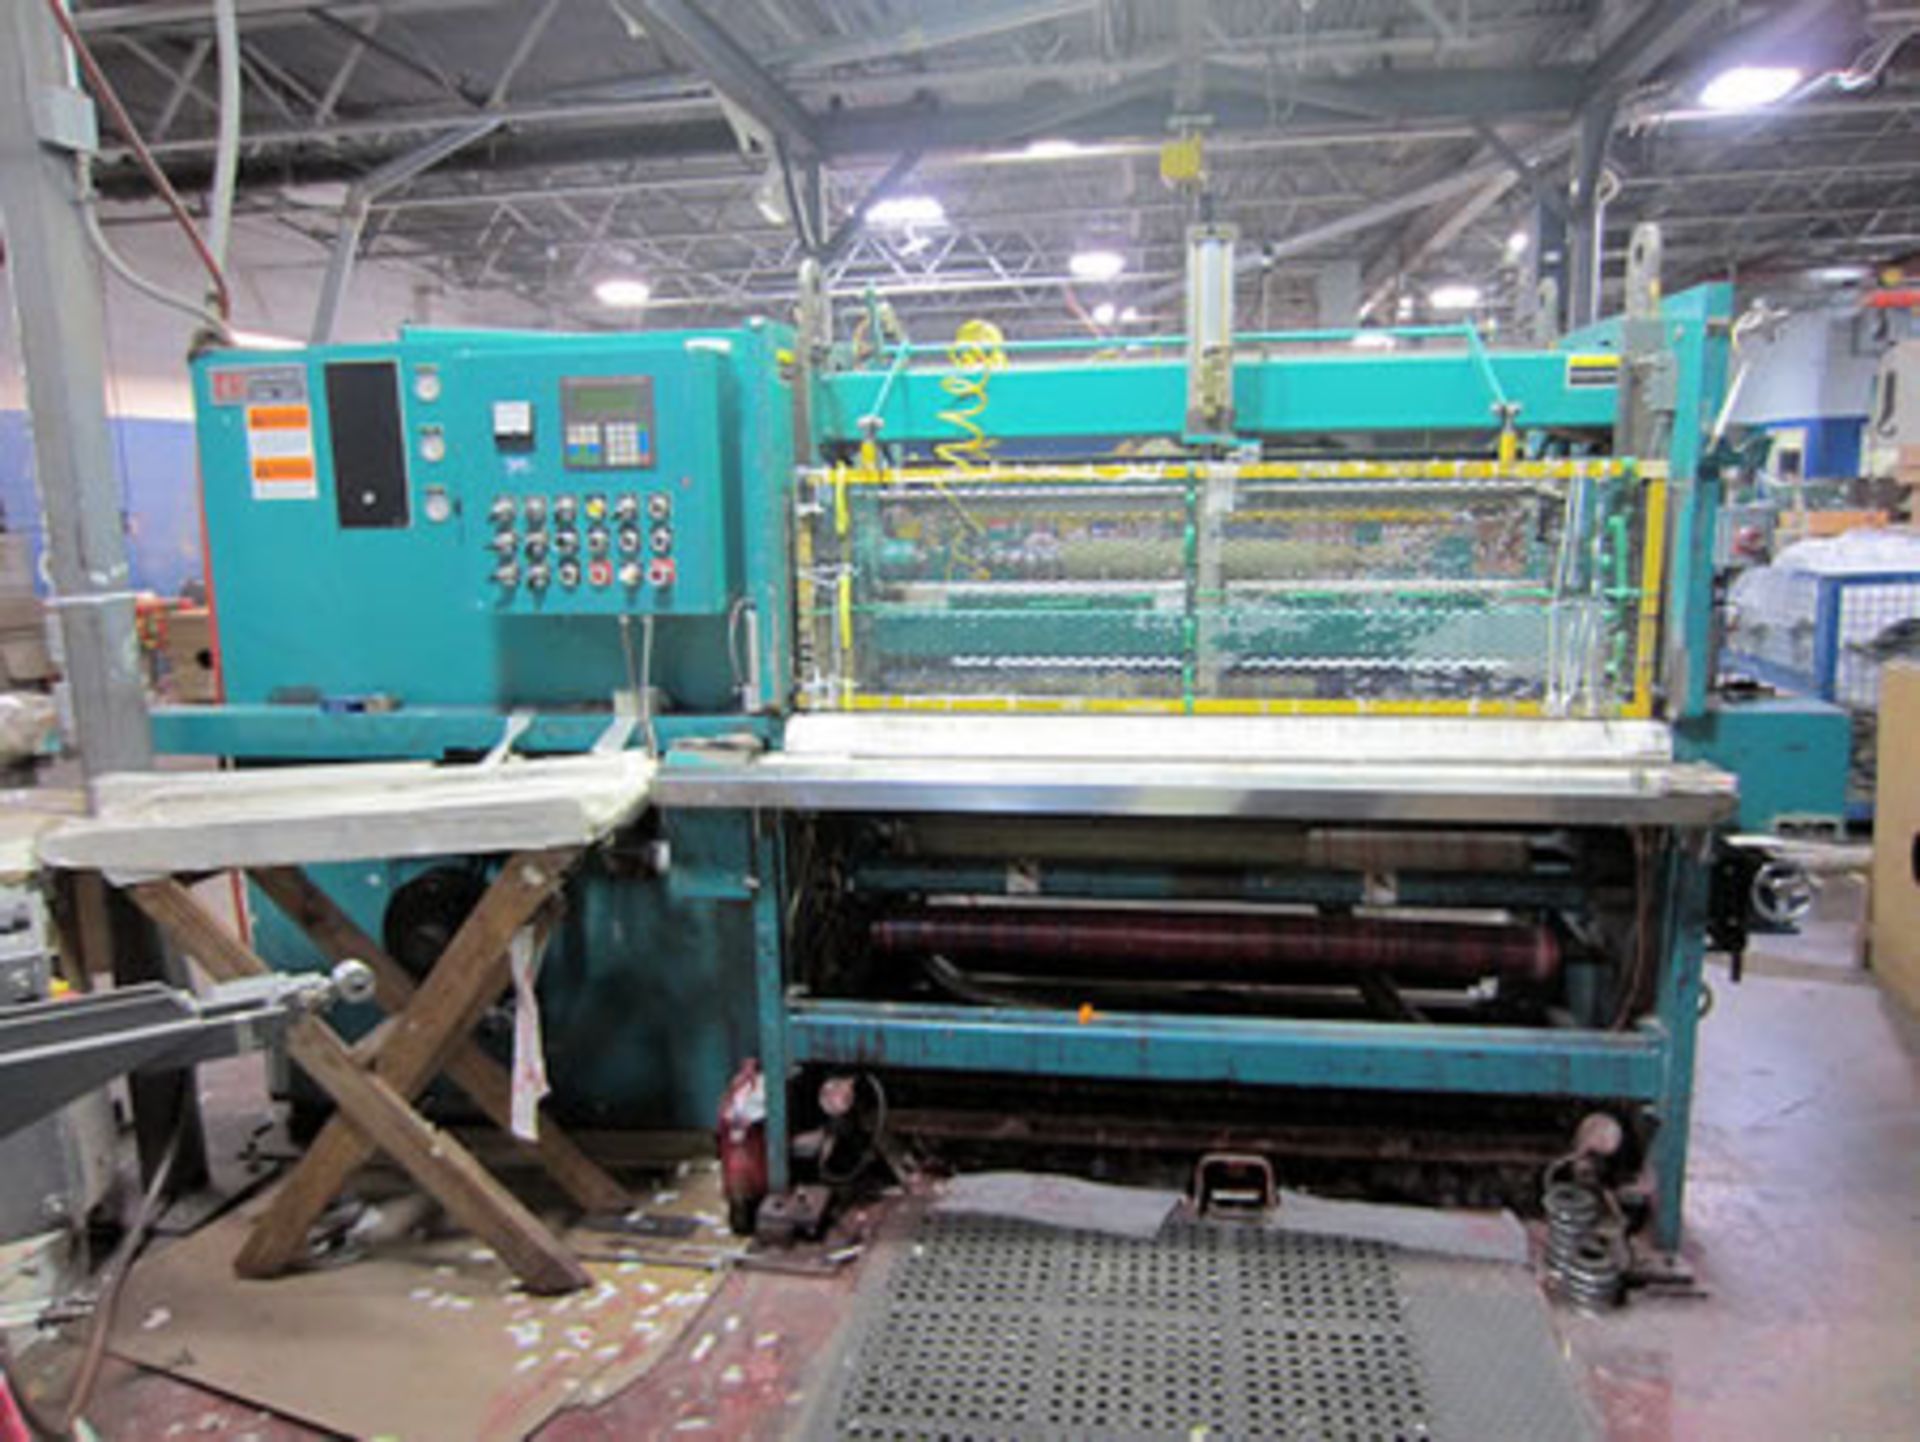 1996 Dusenbery 616MP-2 2 Ply Add Roll Slitter - 54" web width, 2-position 50" diameter unwind with - Image 2 of 11